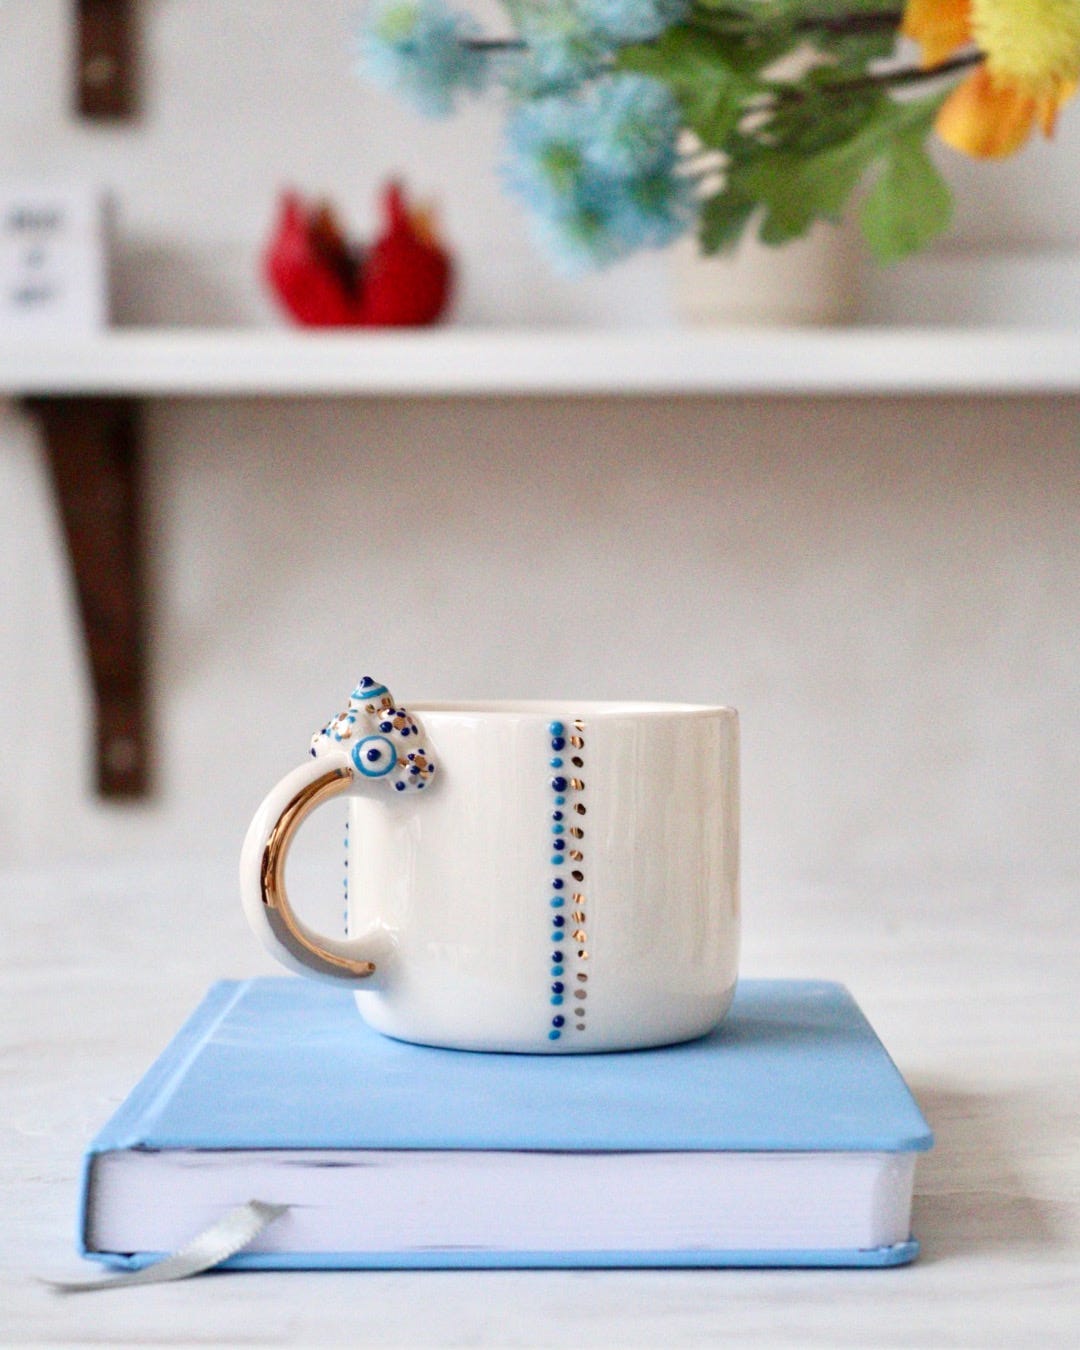 Why Handmade Ceramic Coffee Mugs Are the Best for Enjoying Your